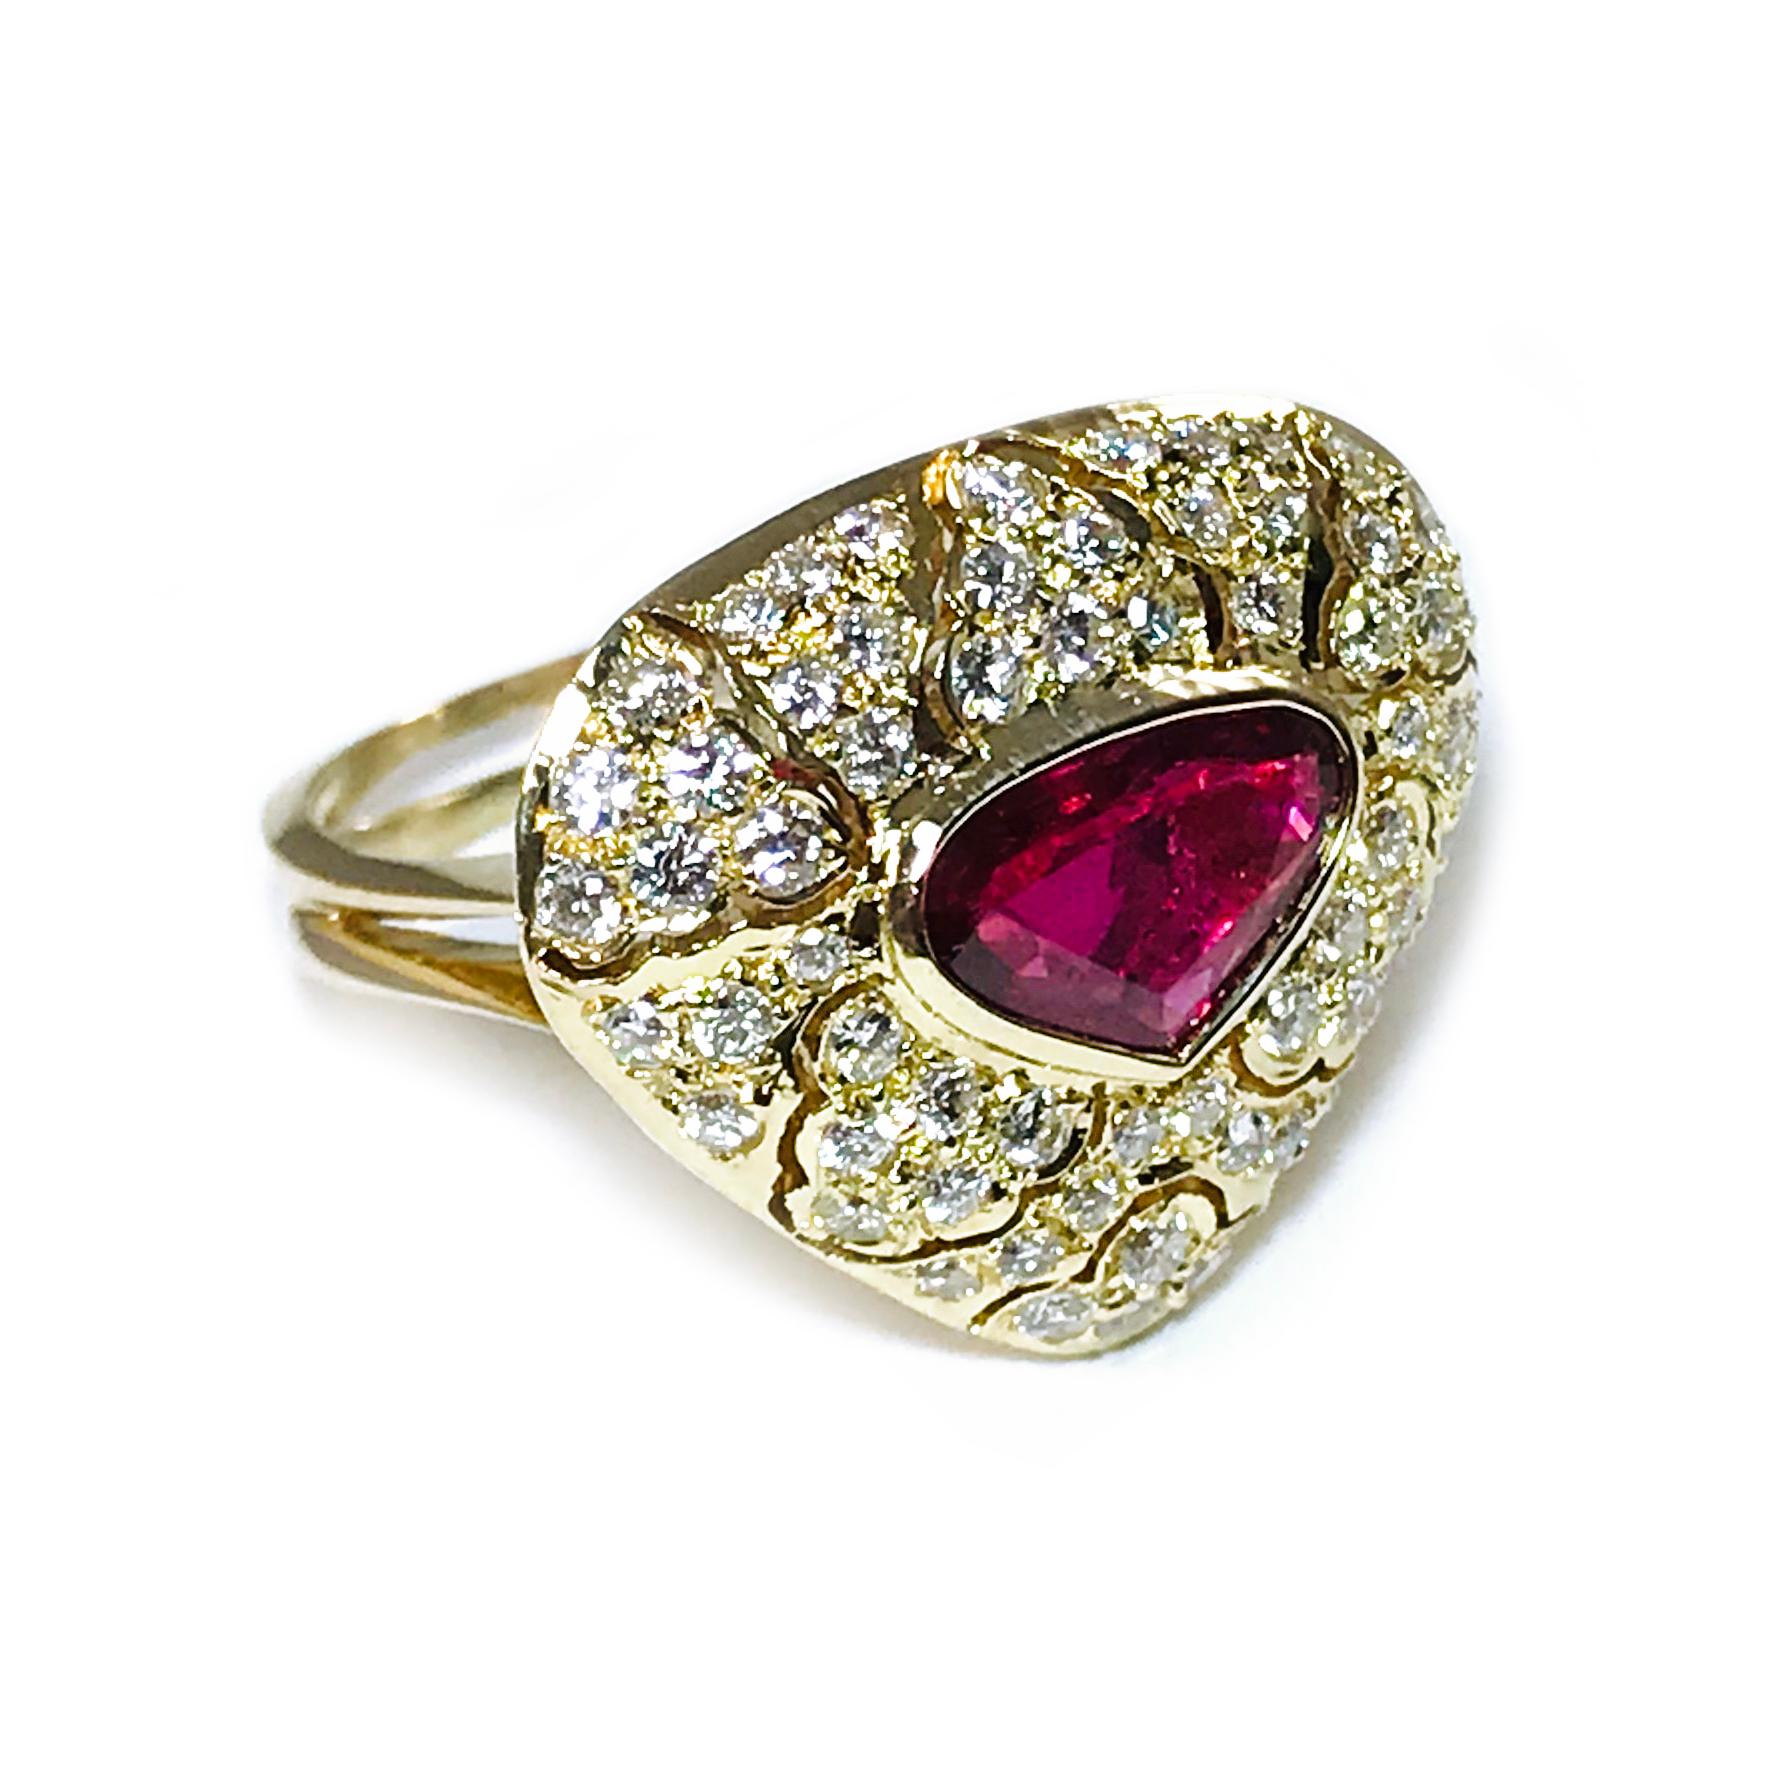 18 Karat Rubellite Tourmaline Diamond Ring. Faceted trillion Tourmaline measures 6.3 x 9.3 x 3mm for a weight of 1.10ct. Sixty-two round pavé-set diamonds surround the Tourmaline and create a rounded triangle-shaped dome. Diamonds are SI1-SI2 in